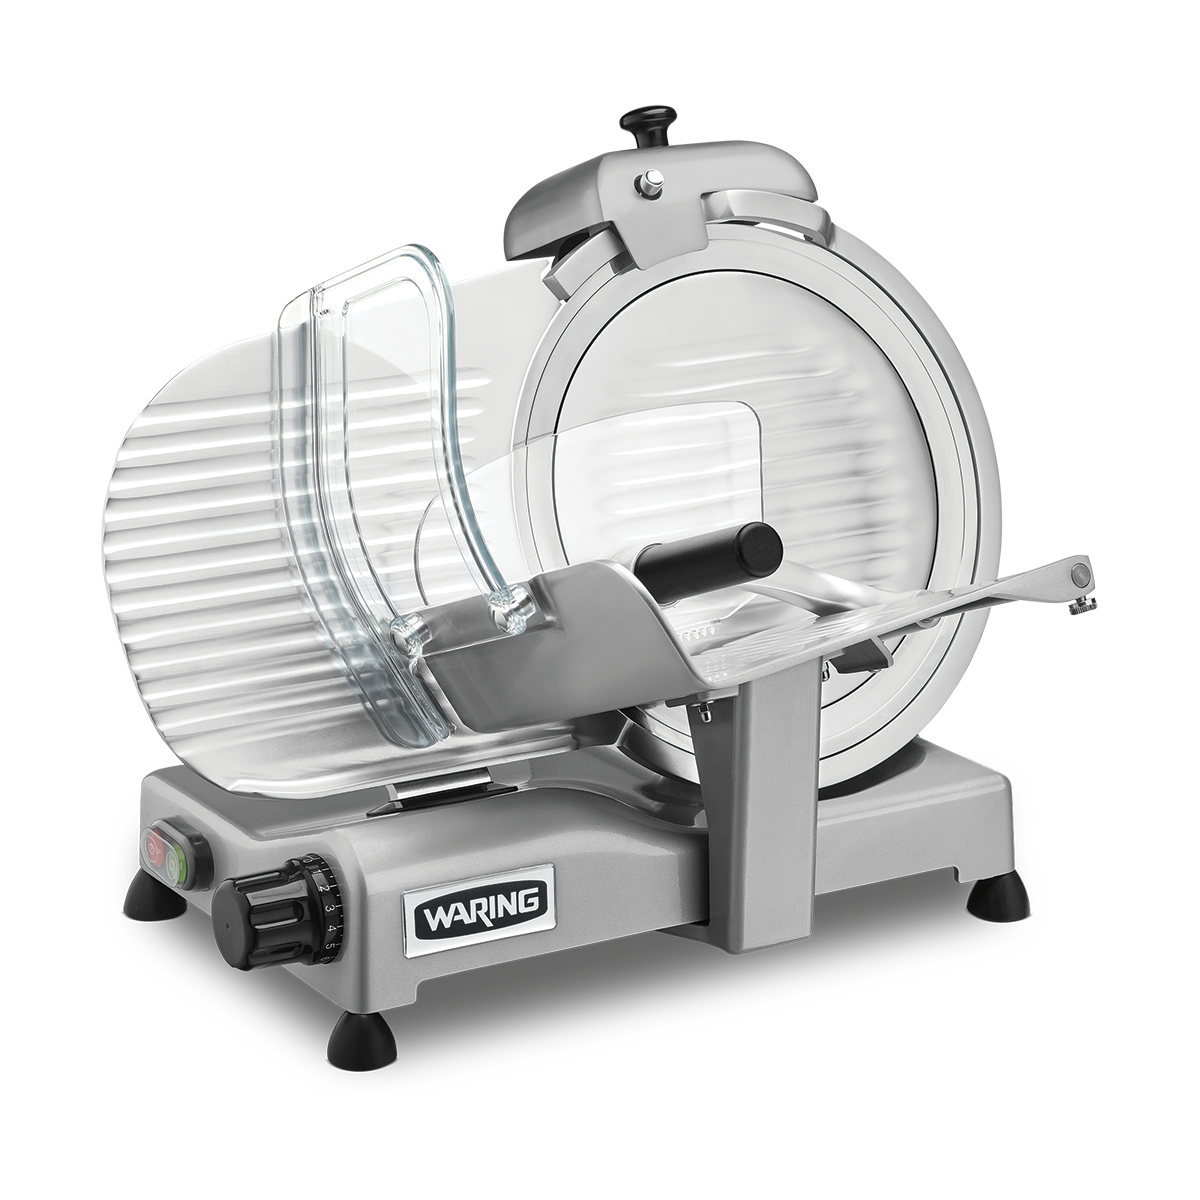 https://www.waringcommercialproducts.com/files/products/waring-wcs300sv-food-slicer.png